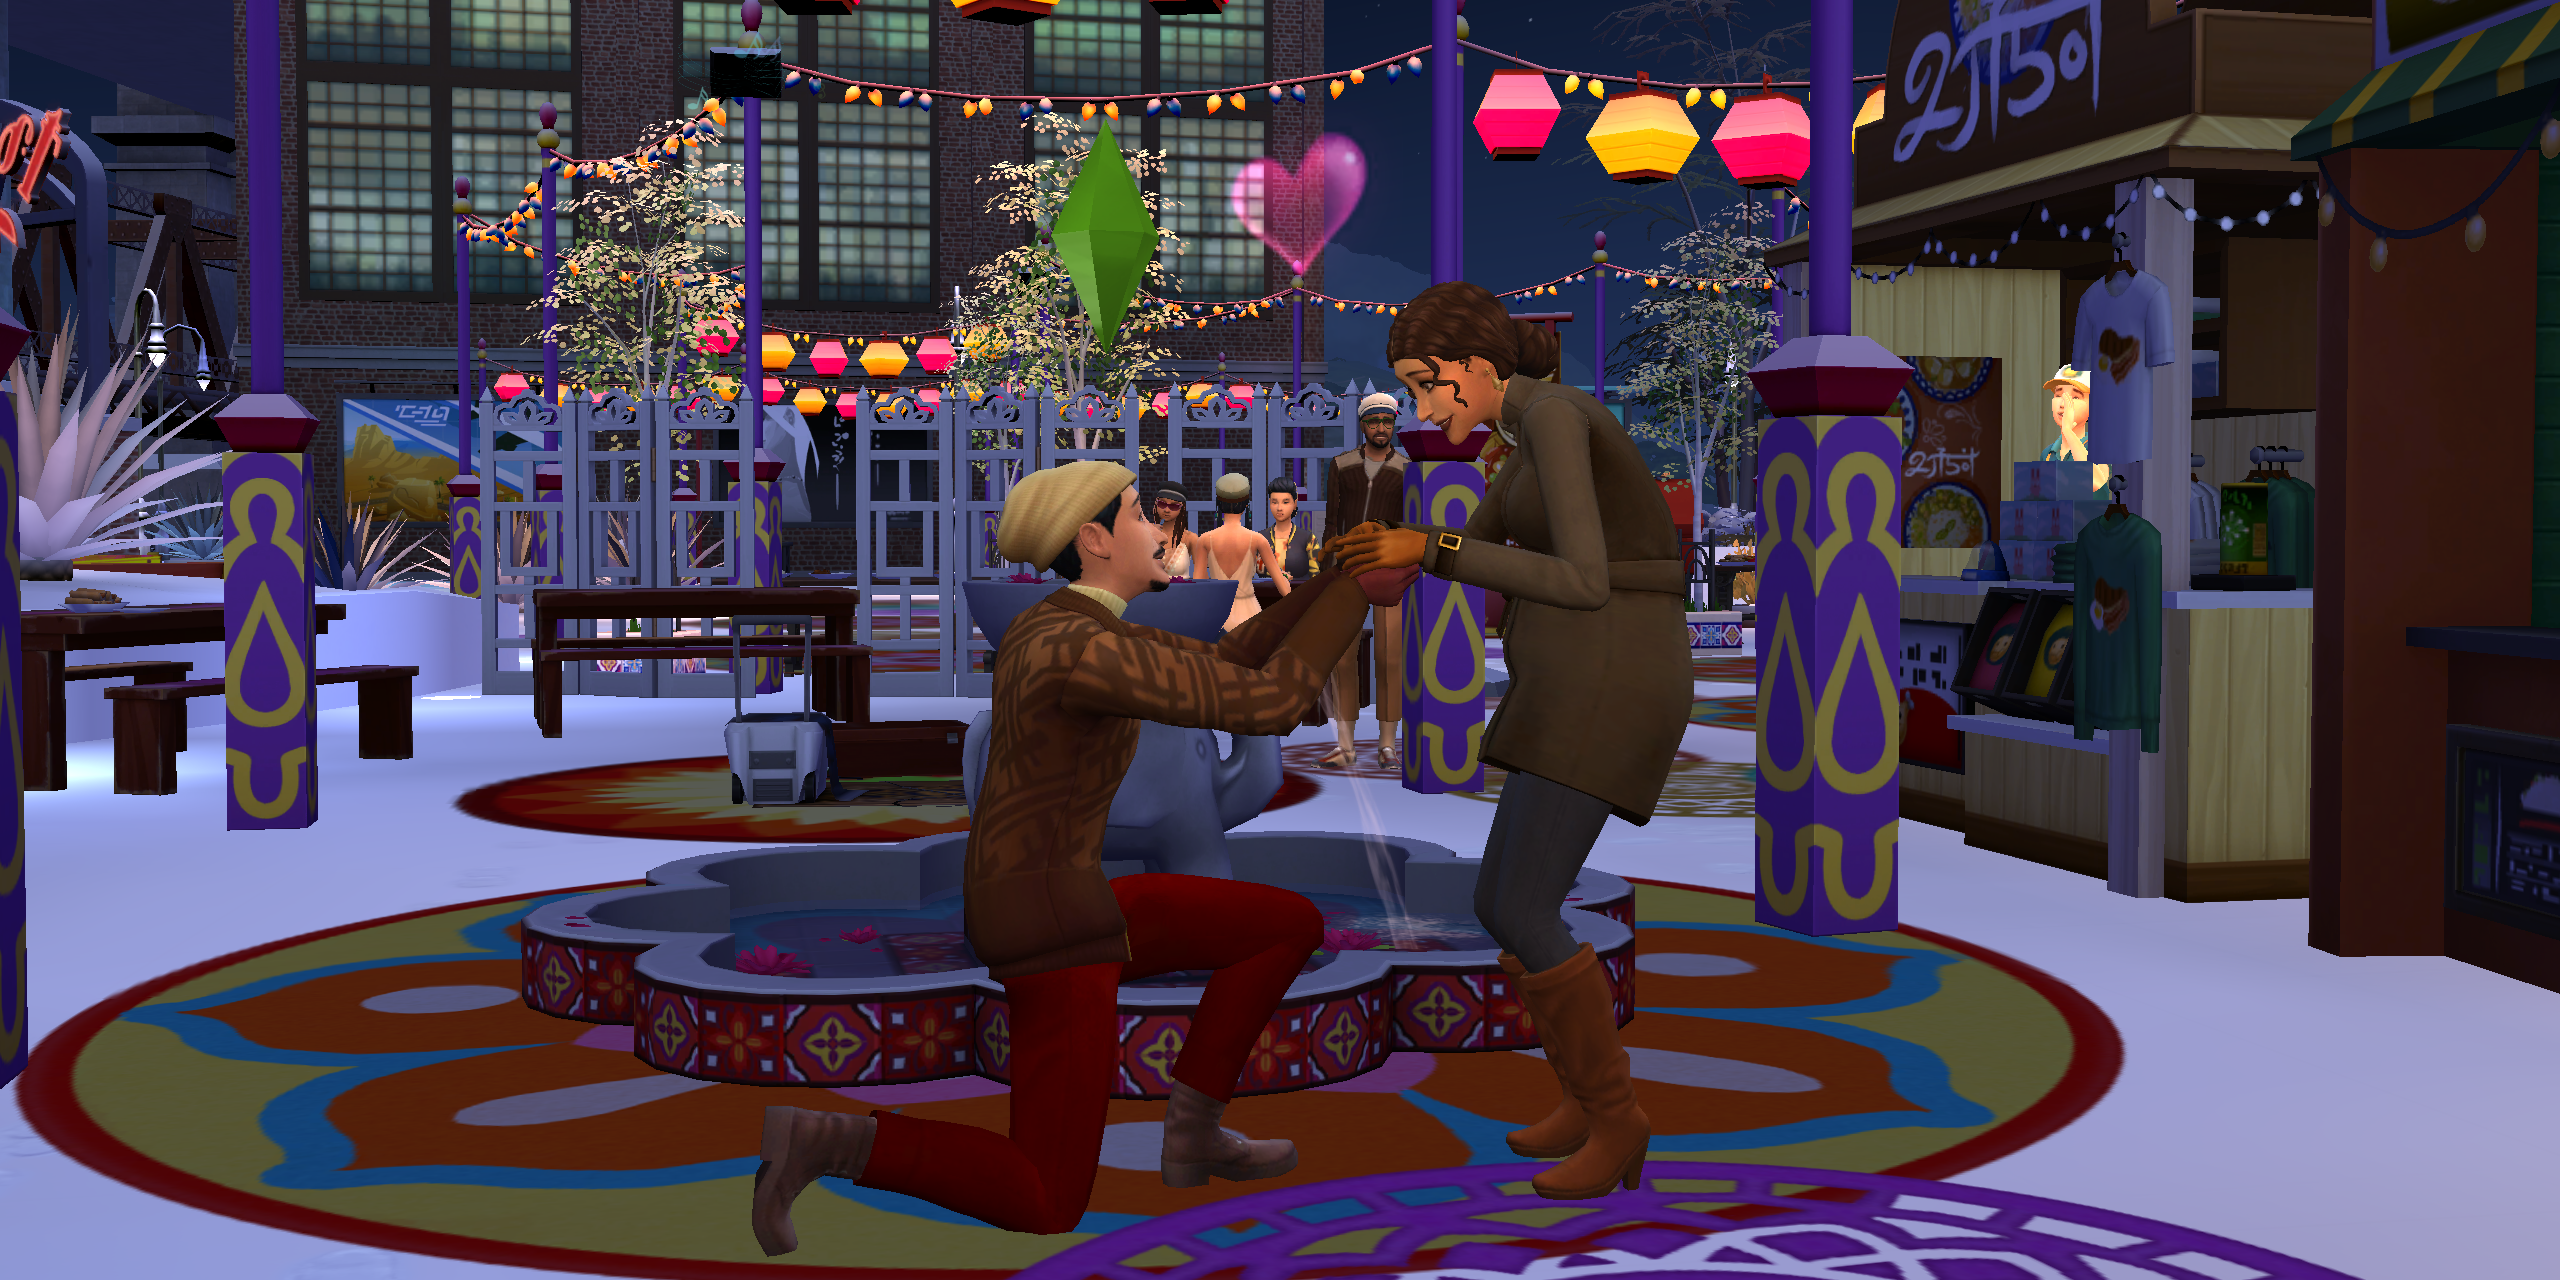 A Sim down on one knee, proposing to their partner during a festival